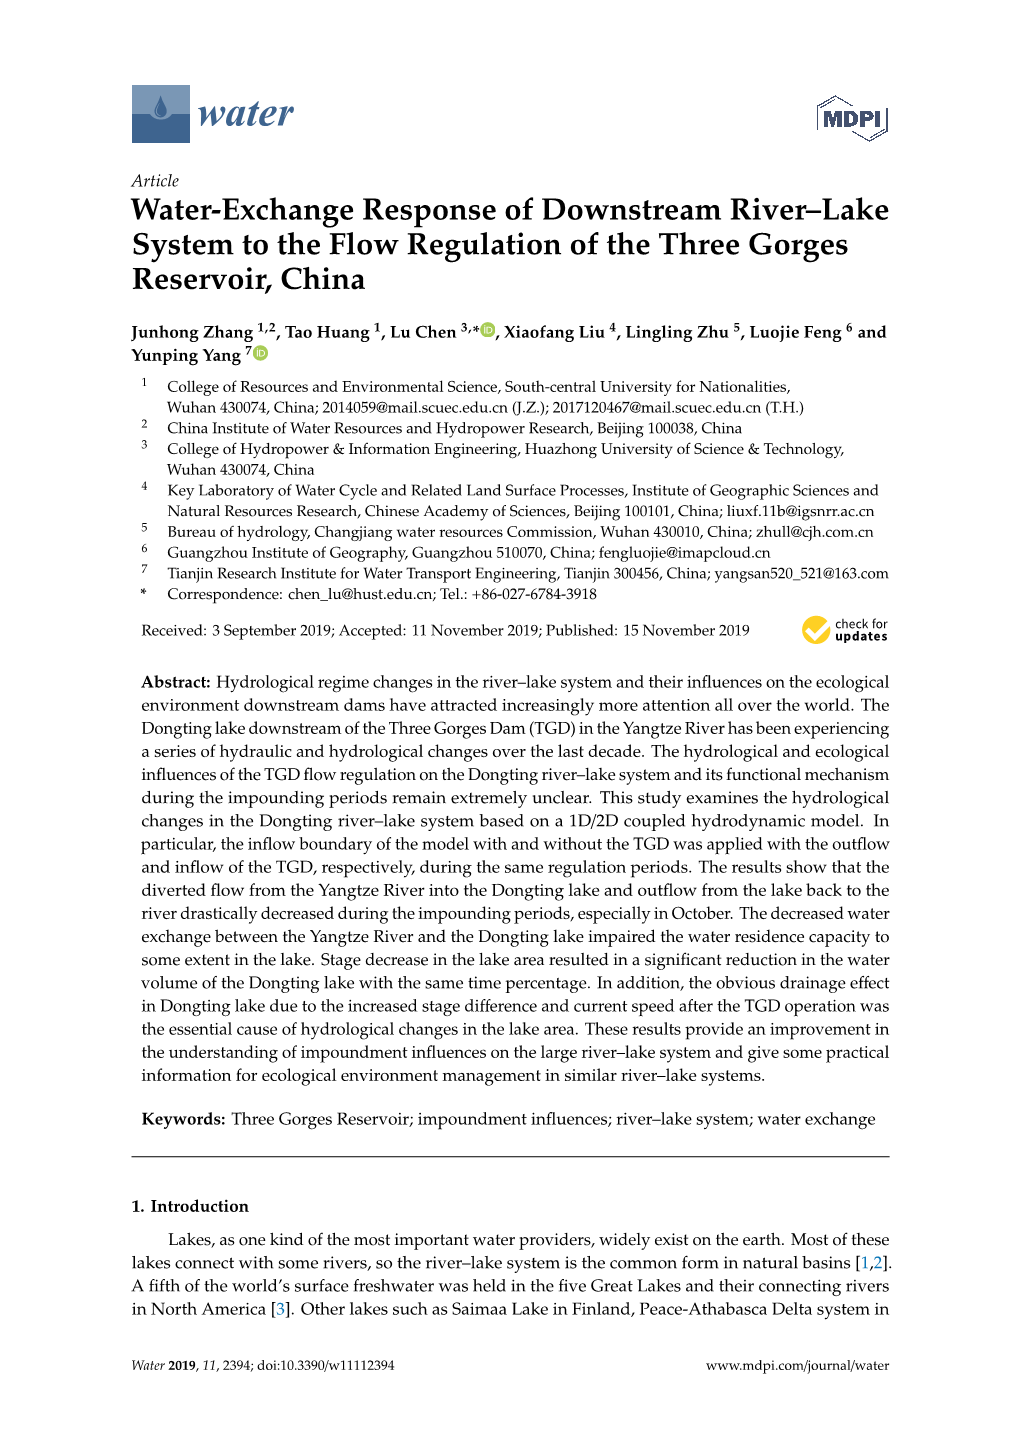 Water-Exchange Response of Downstream River–Lake System to the Flow Regulation of the Three Gorges Reservoir, China